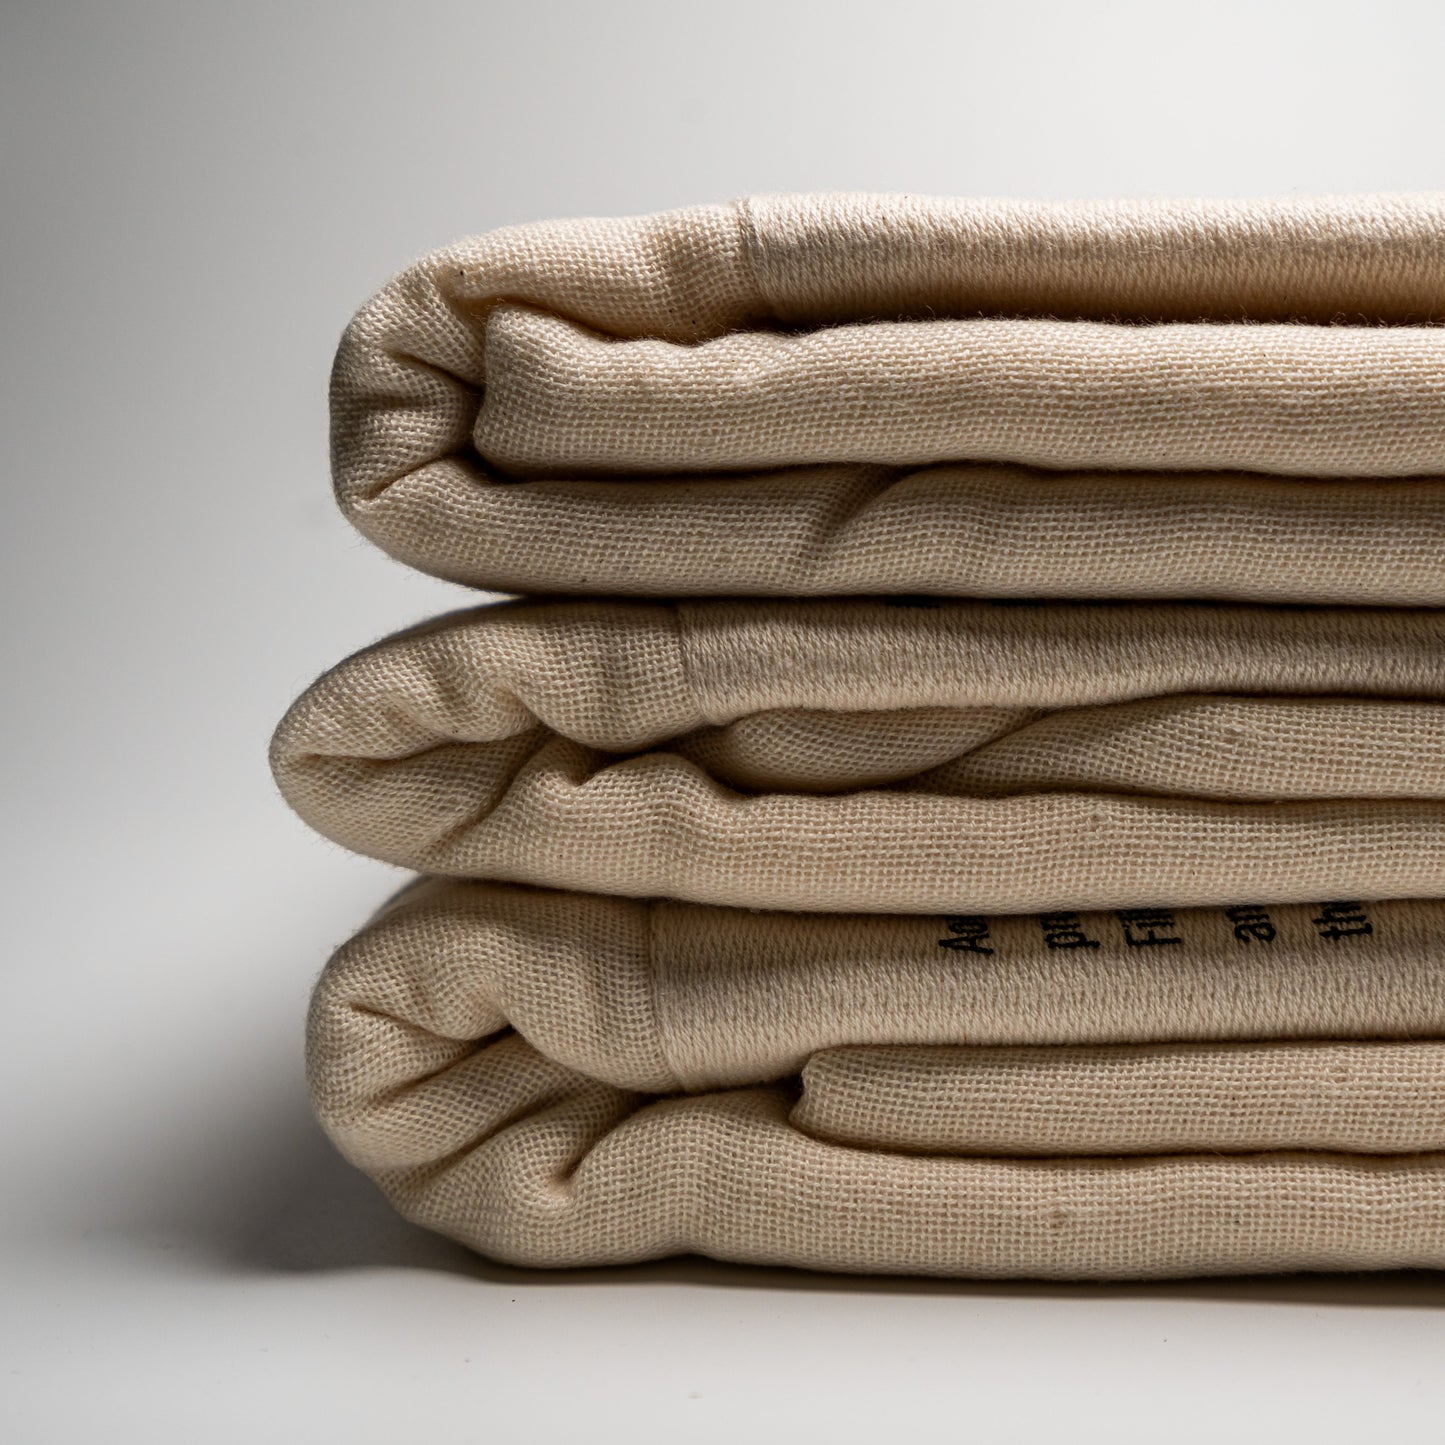 A stack of natural Filhiba bath towels on a white background